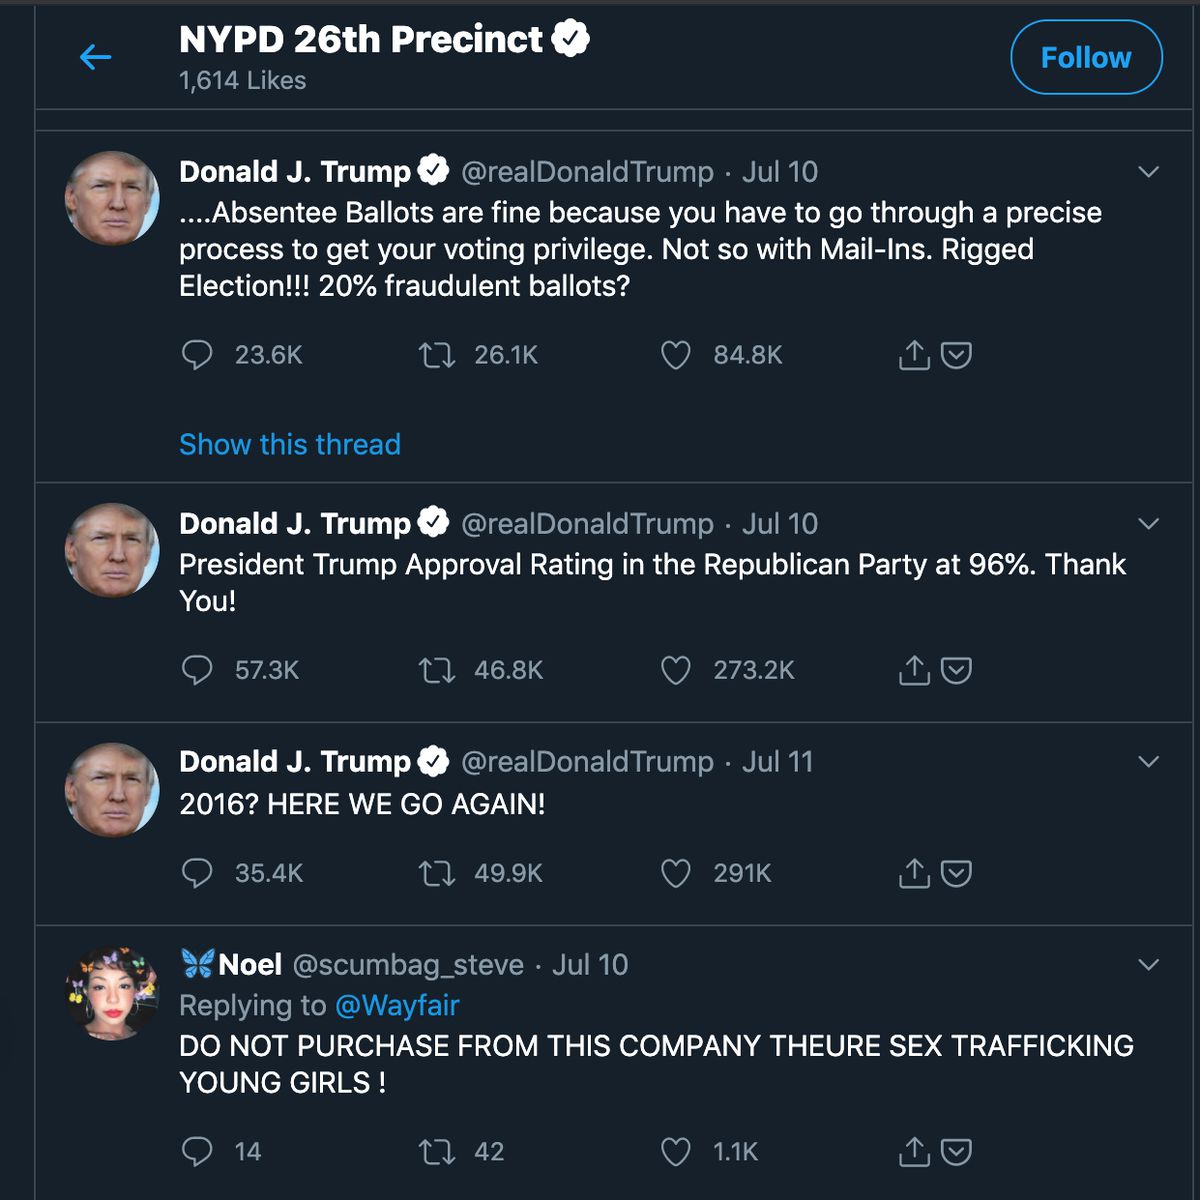 The NYPD’s 26th Precinct Twitter account liked a conspiratorial tweet by President Trump.